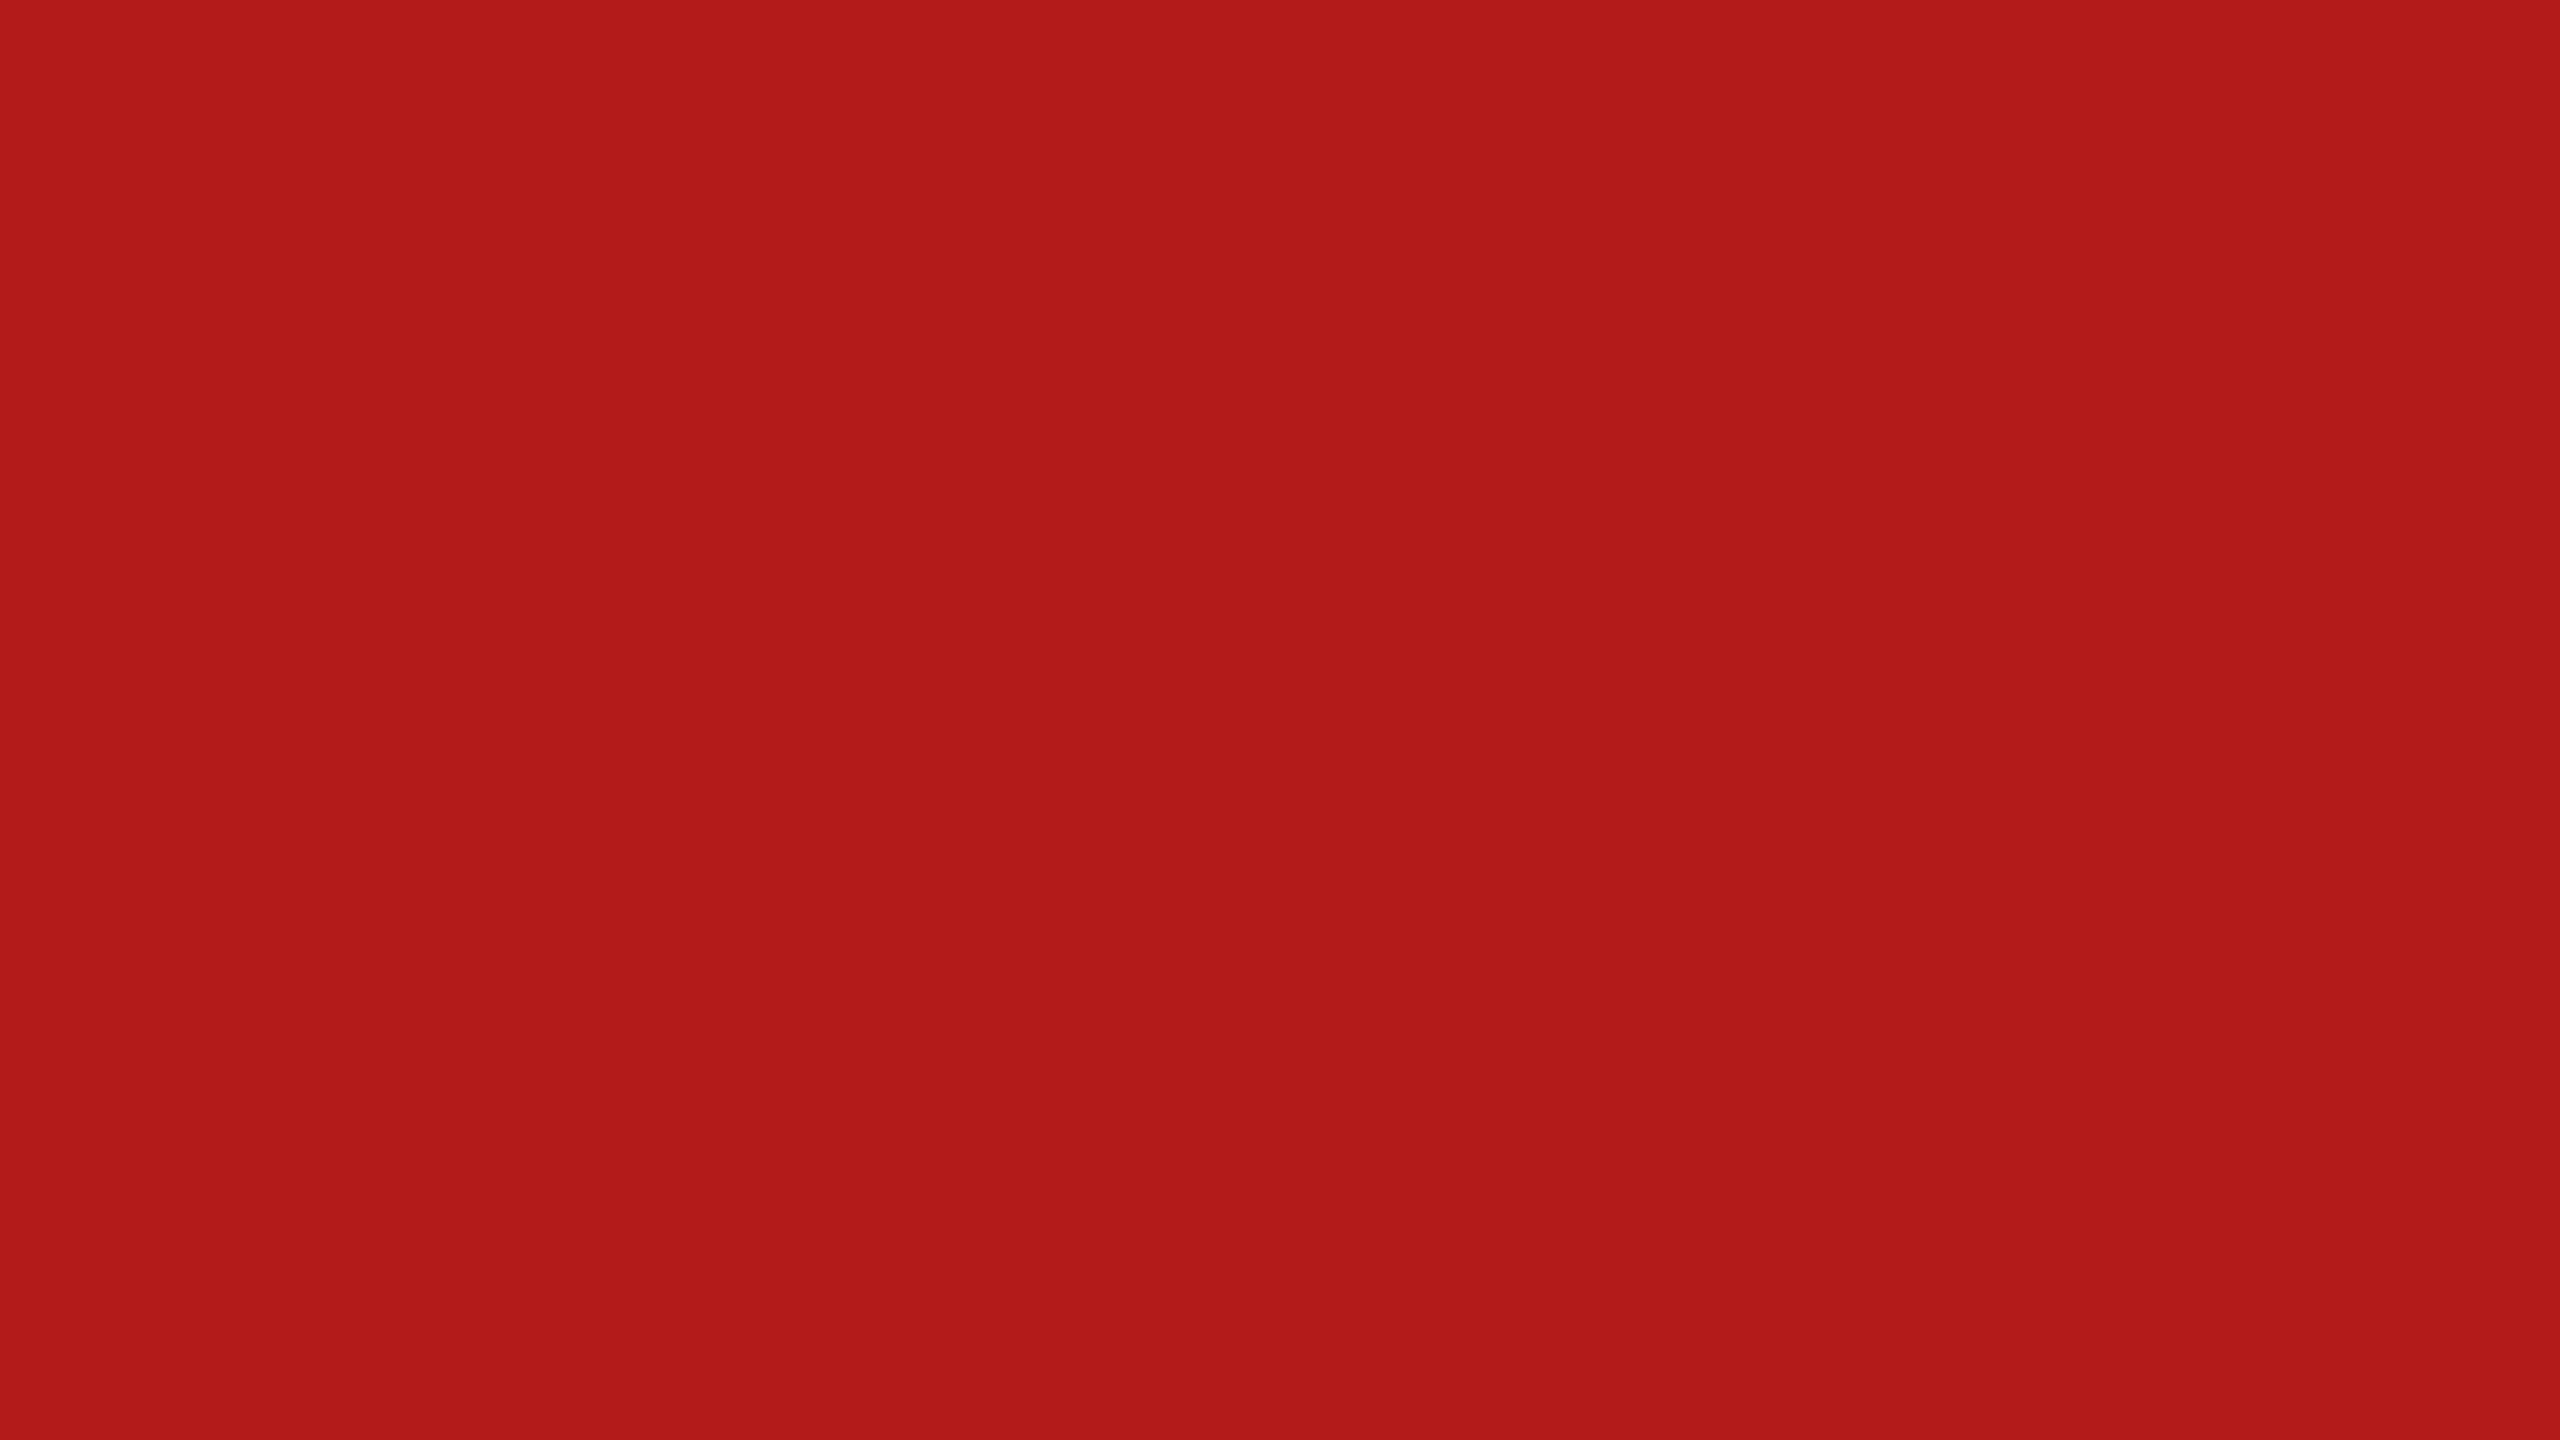 2560x1440 Cornell Red Solid Color Background